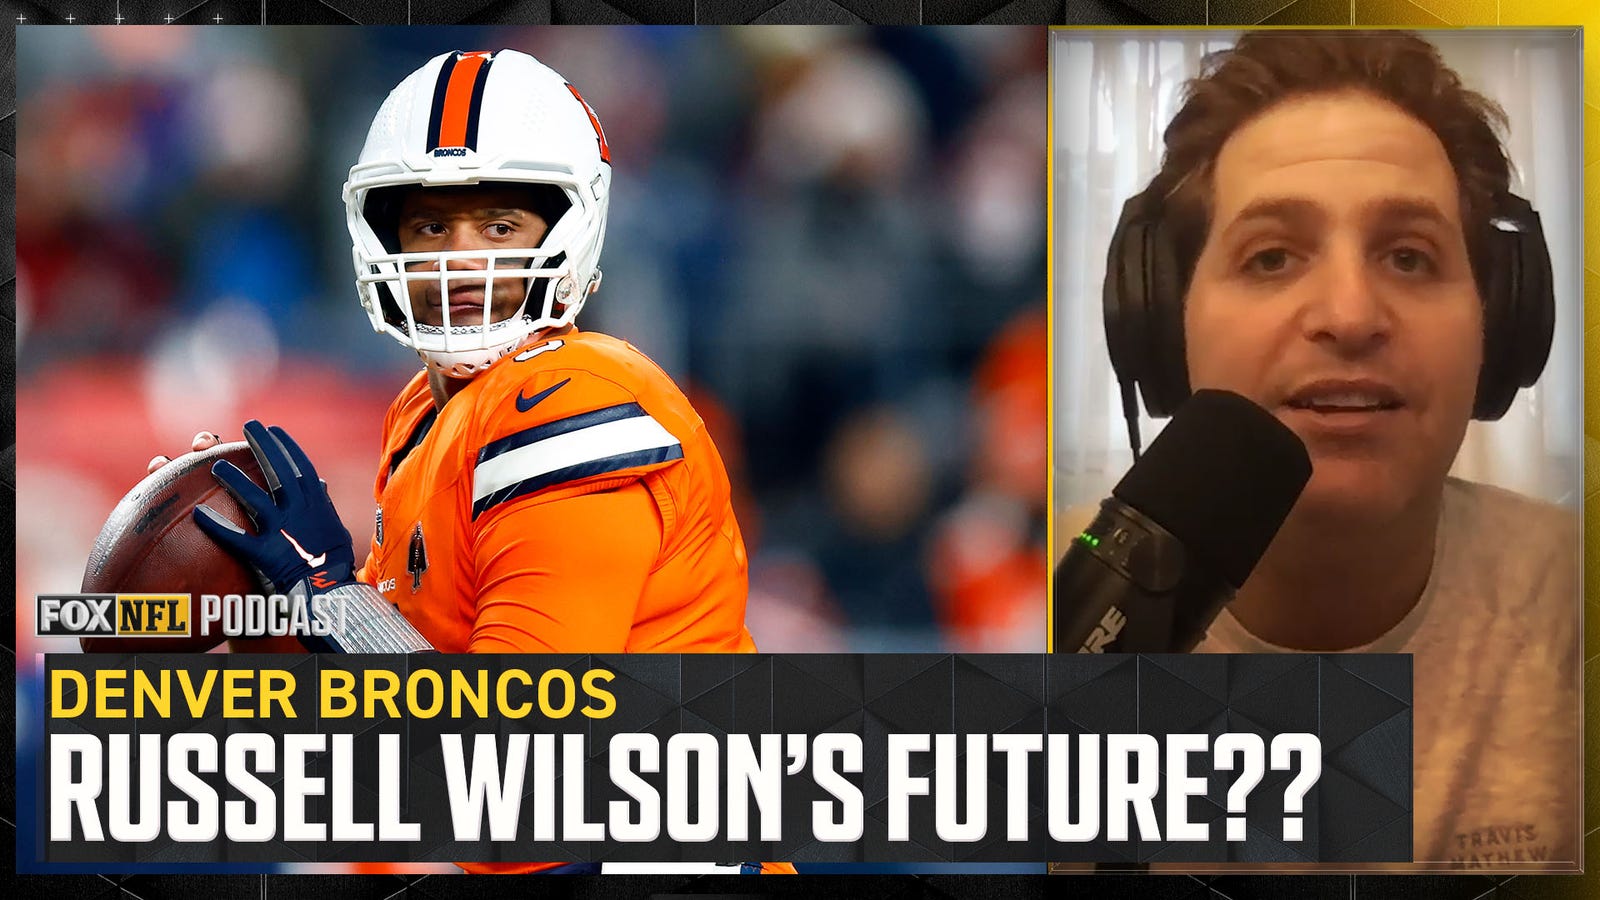 What is Russell Wilson's future?